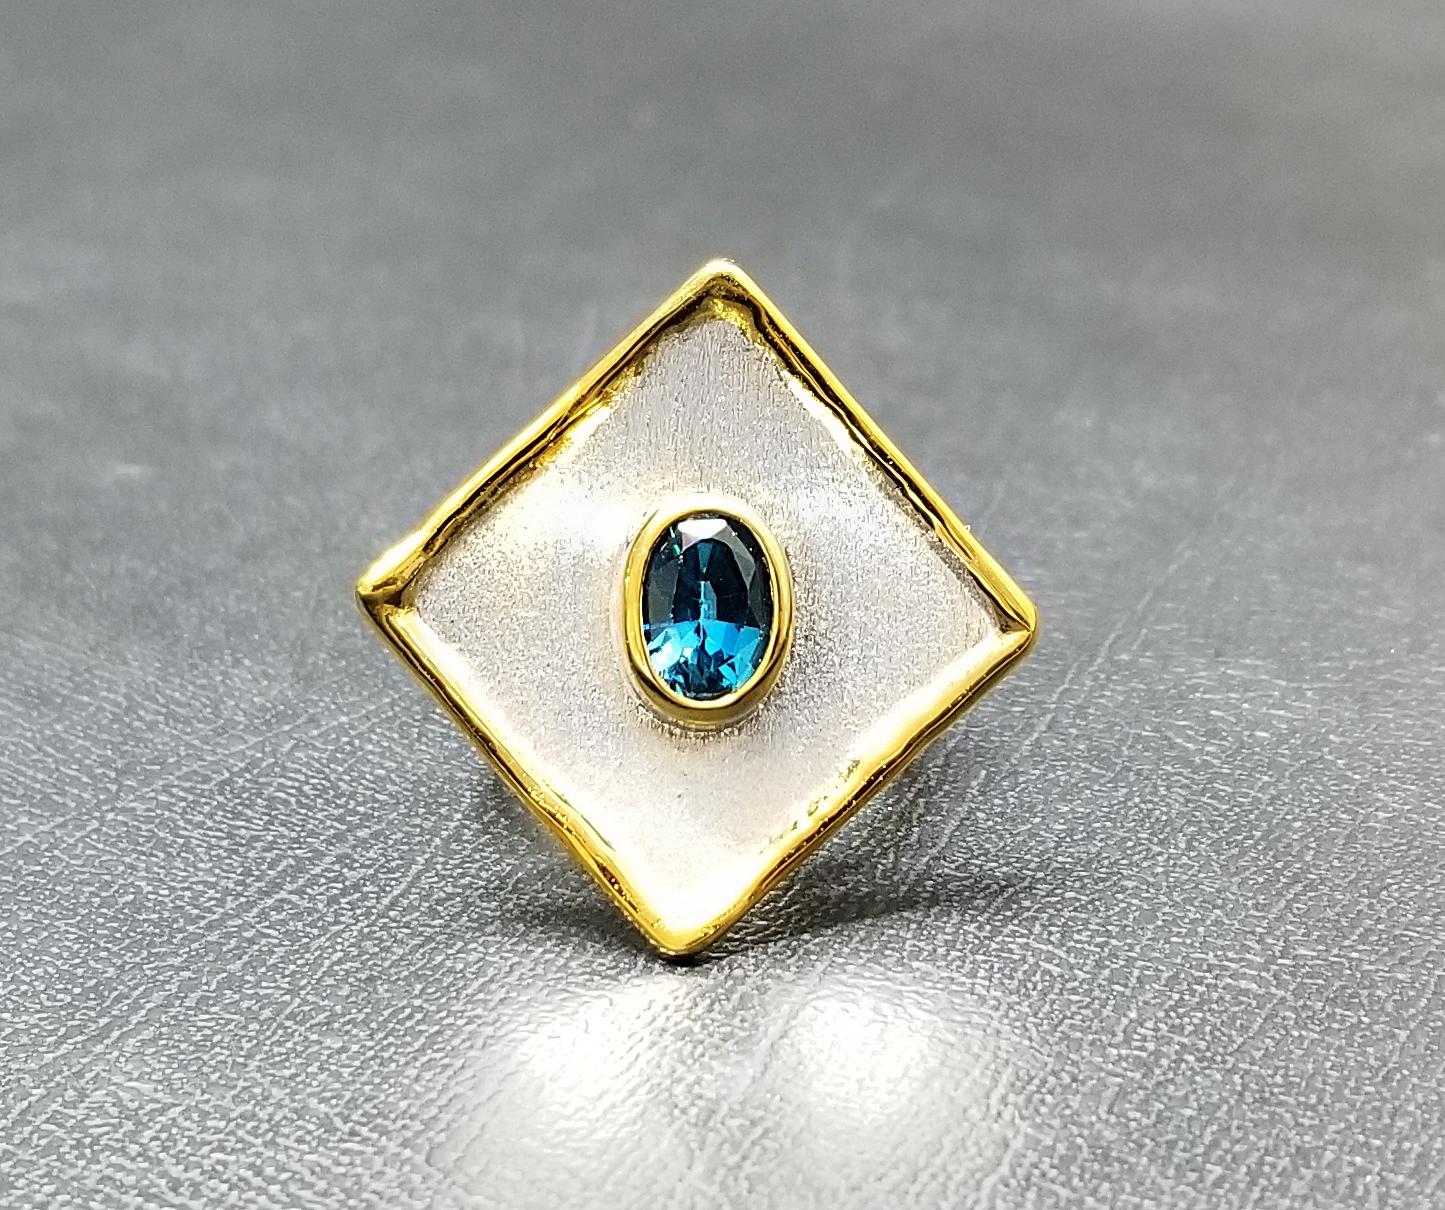 Presenting Yianni Creations ring from Ammos Collection, which was handmade in Greece from fine silver plated with palladium to resist the elements. This geometric-shaped ring features a 1.60 Carat London blue topaz and the gold touch on liquid edges